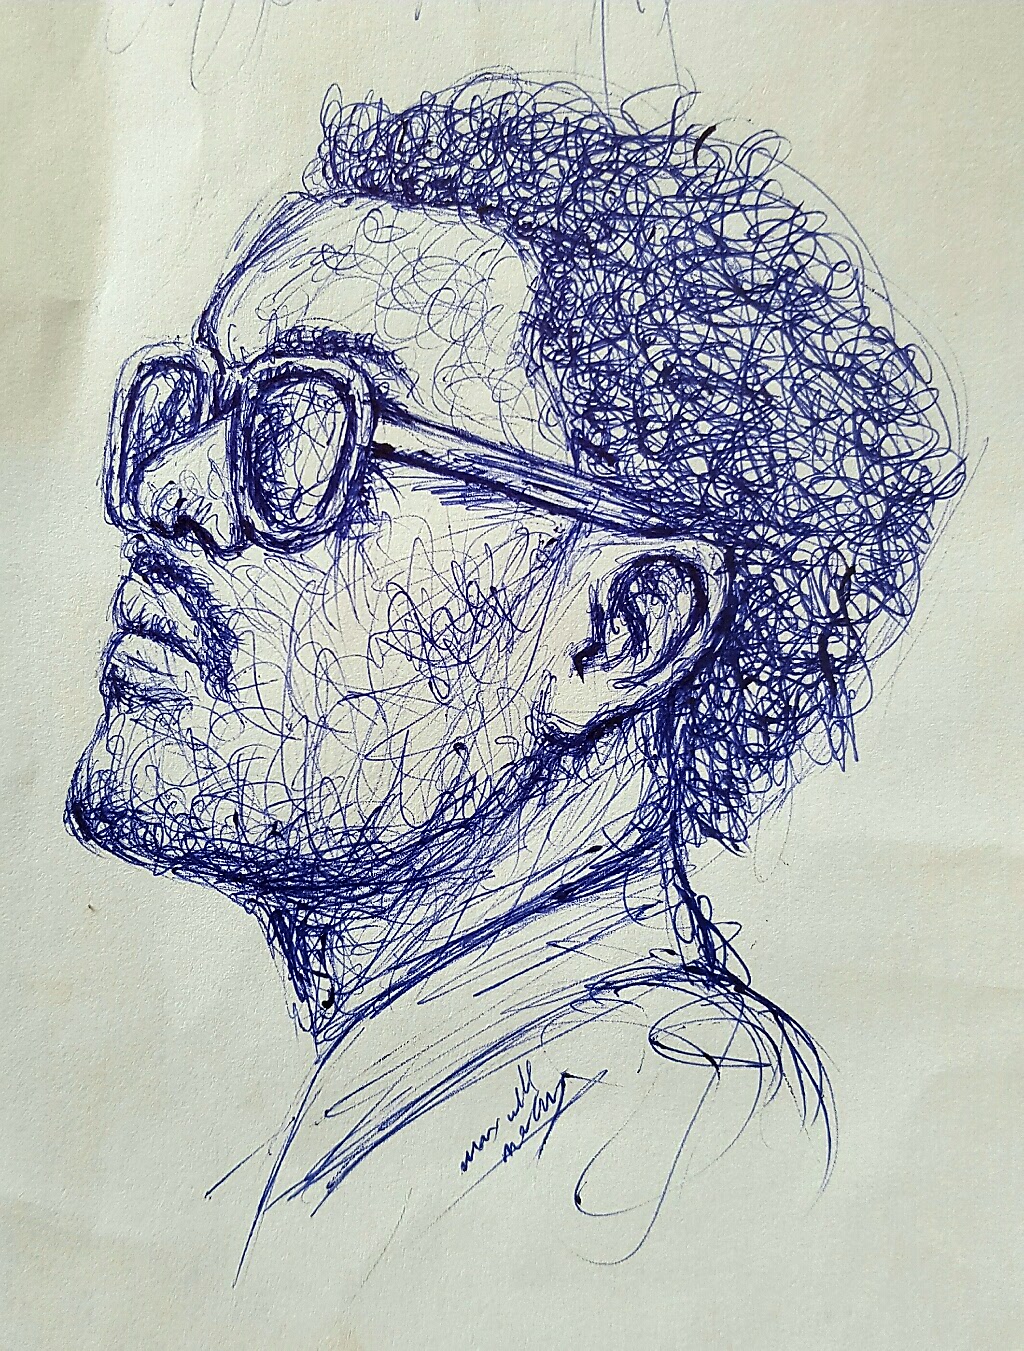 The Weeknd Fan Art  I dont even know  Drawings  Illustration People   Figures Celebrity Musicians  ArtPal